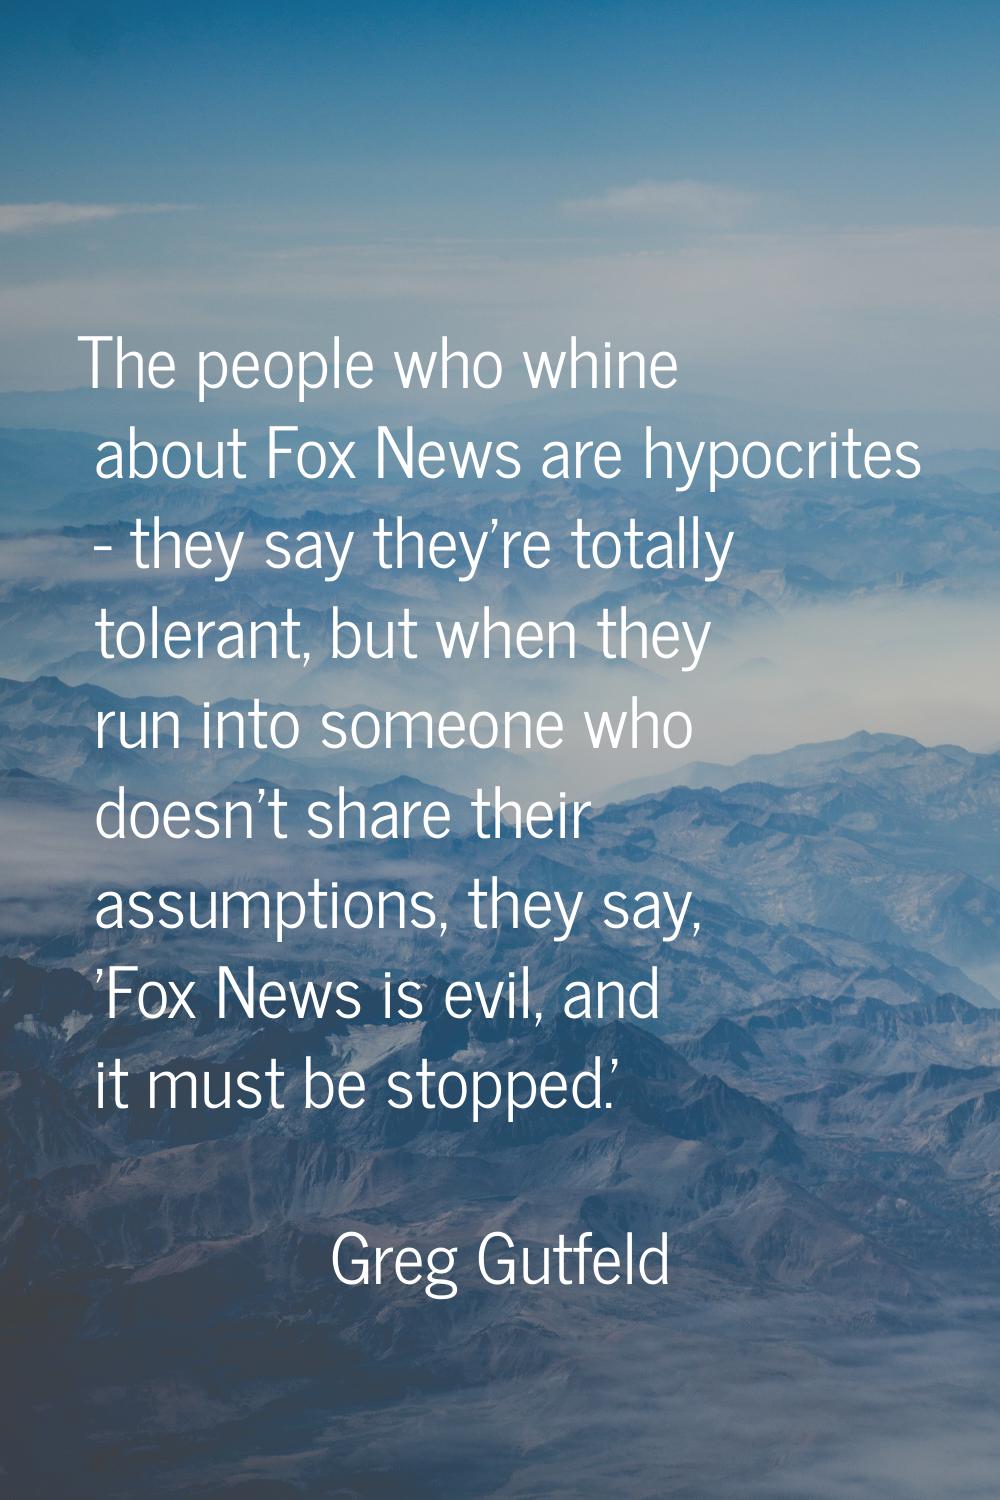 The people who whine about Fox News are hypocrites - they say they're totally tolerant, but when th